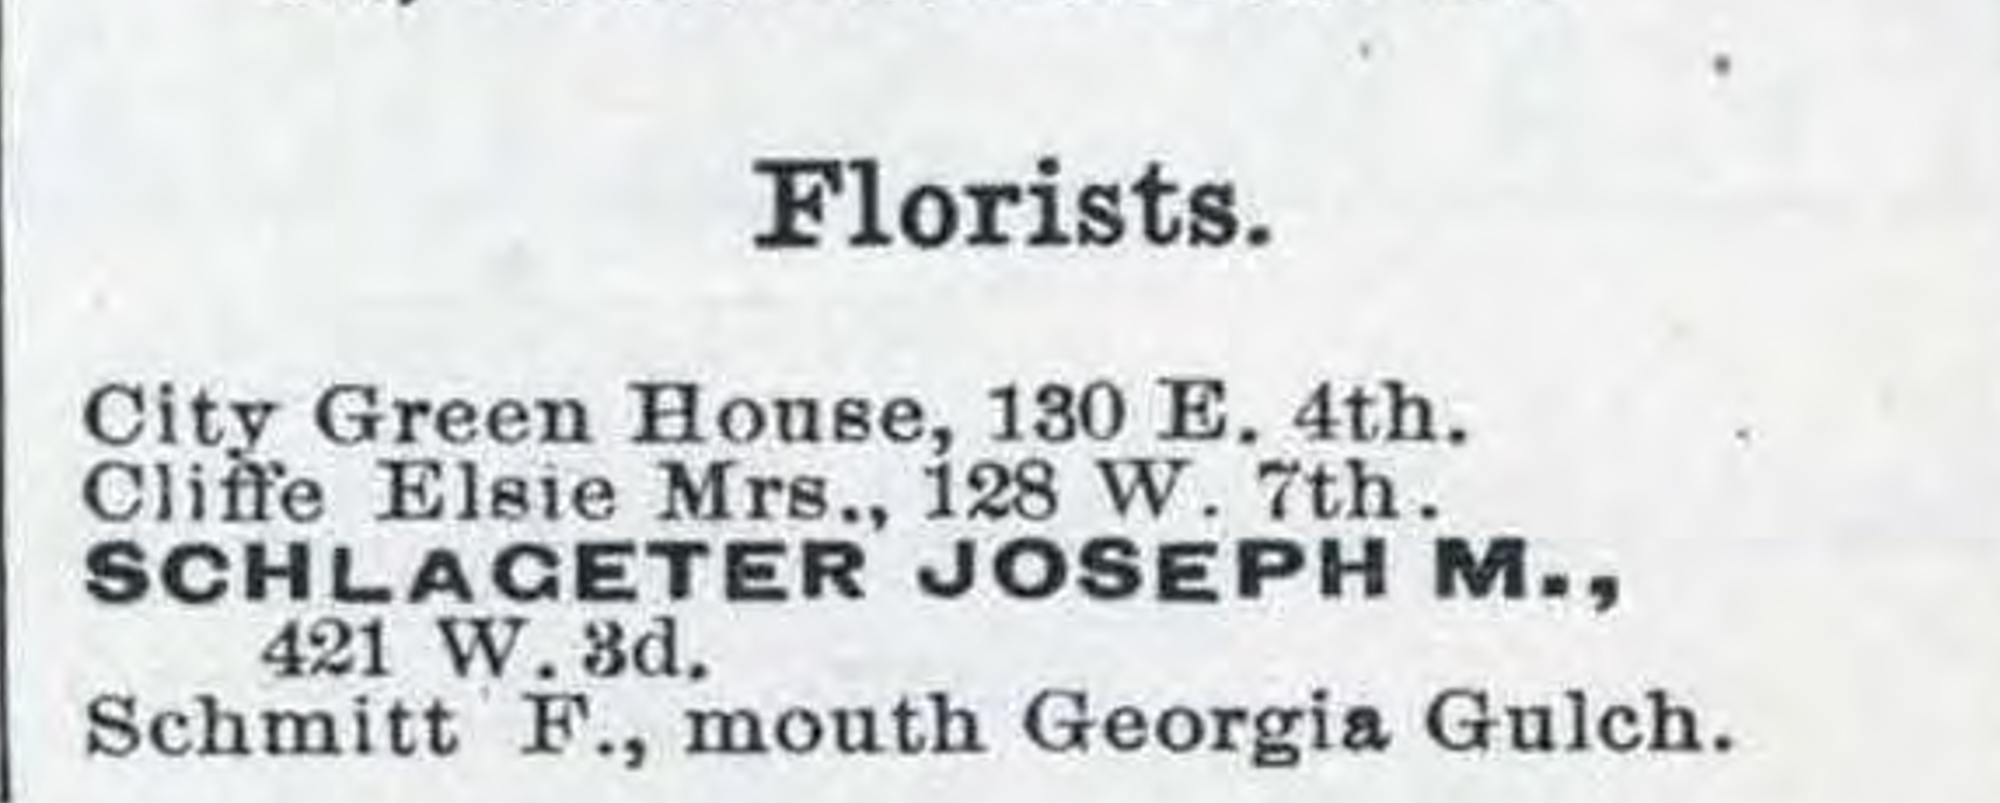 Dauth Family Archive - 1887 - Leadville Directory - Entry for Elisabeth Cliffe Florist